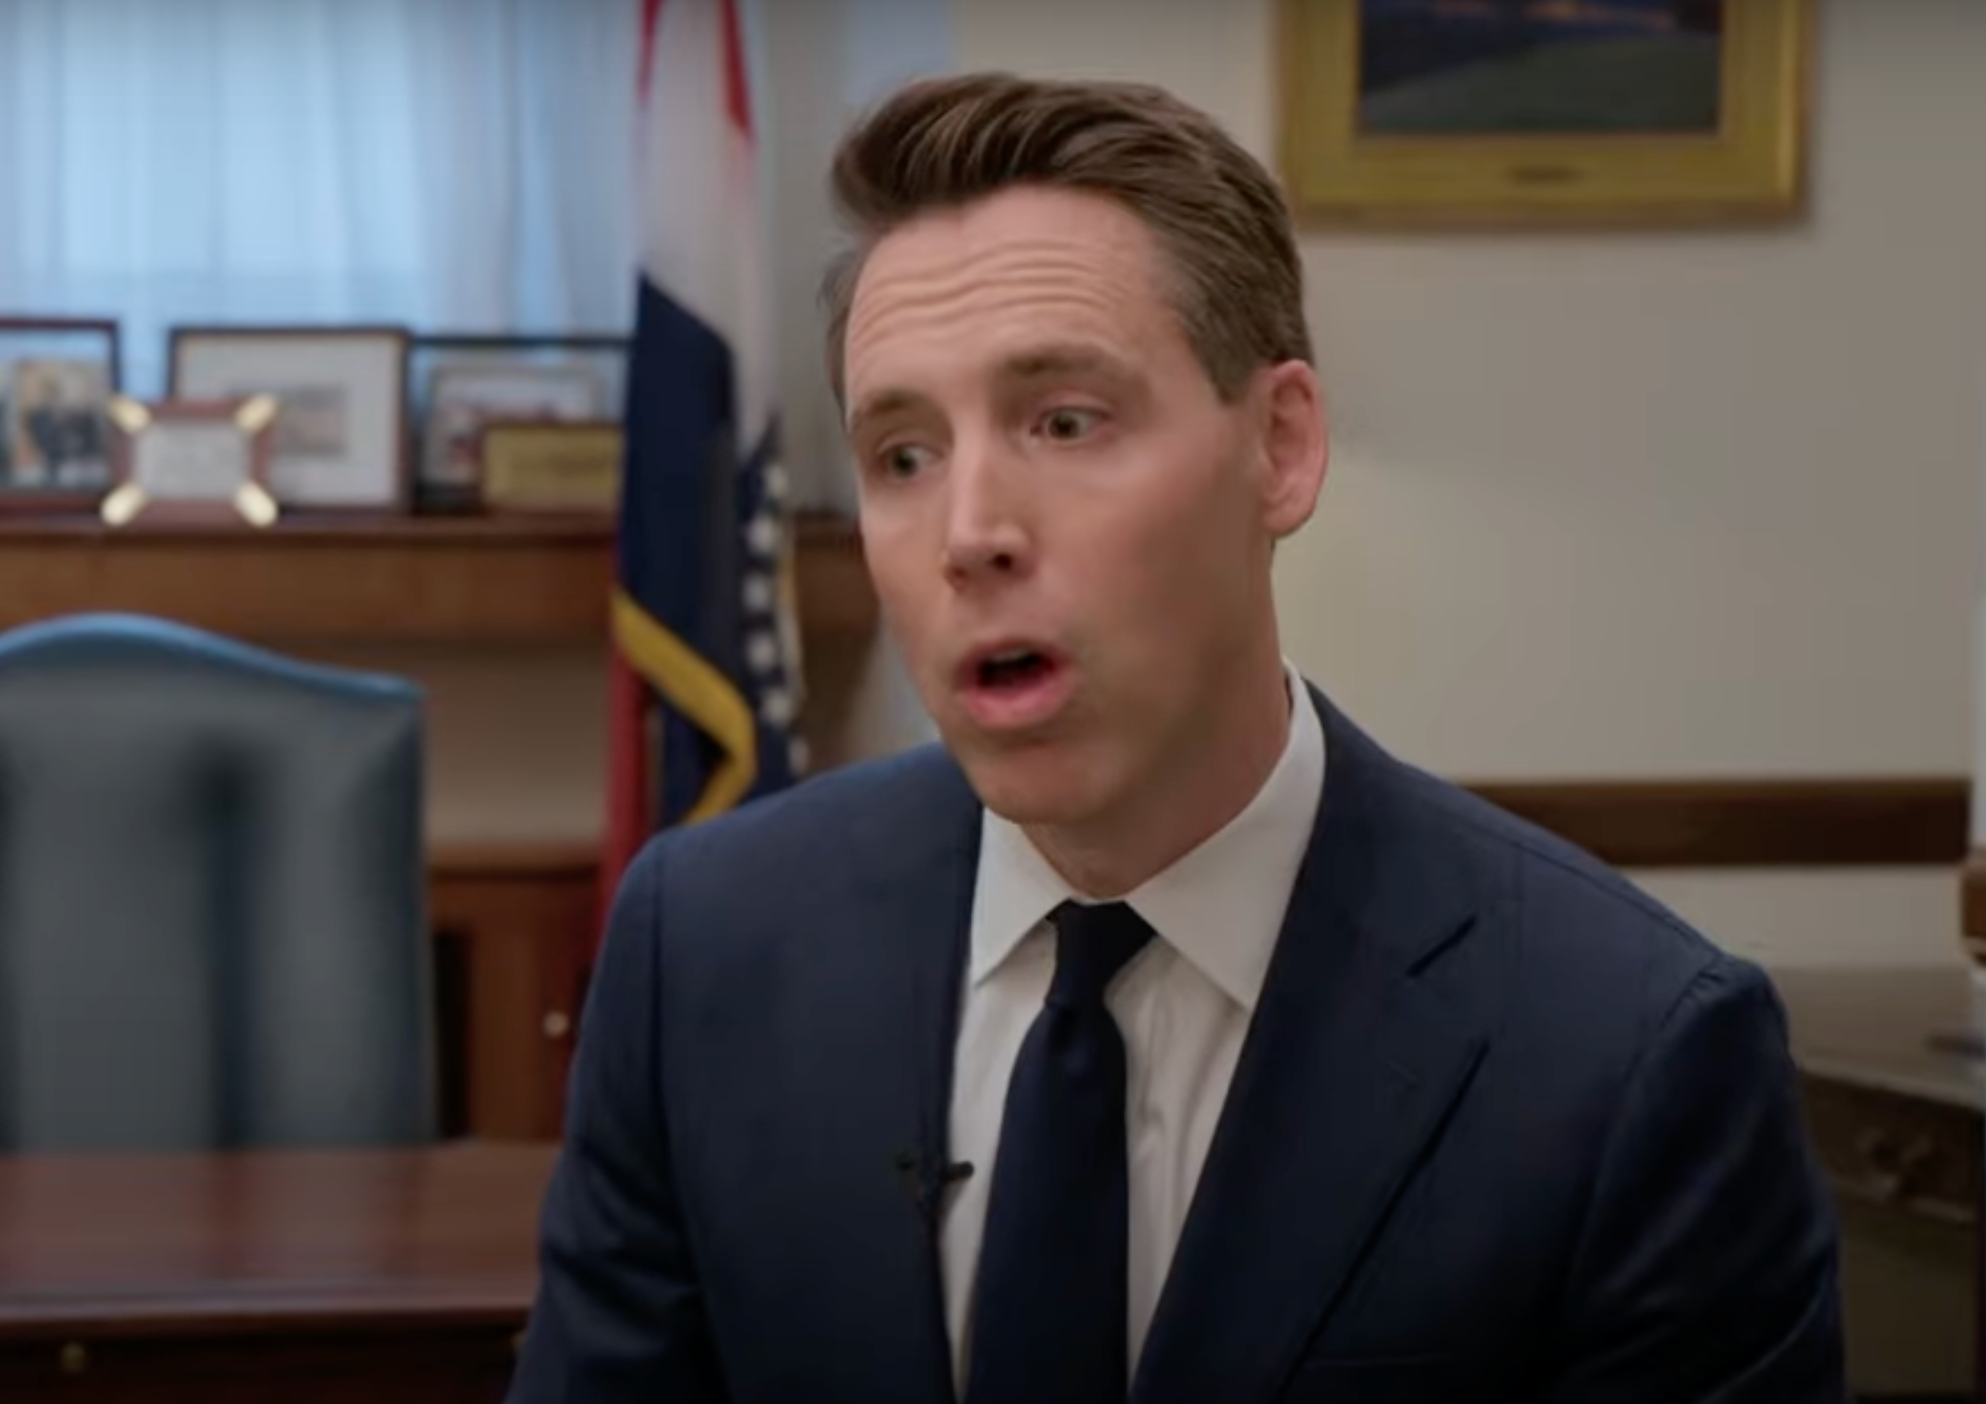 In just one week, you'll be able to read all about Josh Hawley's